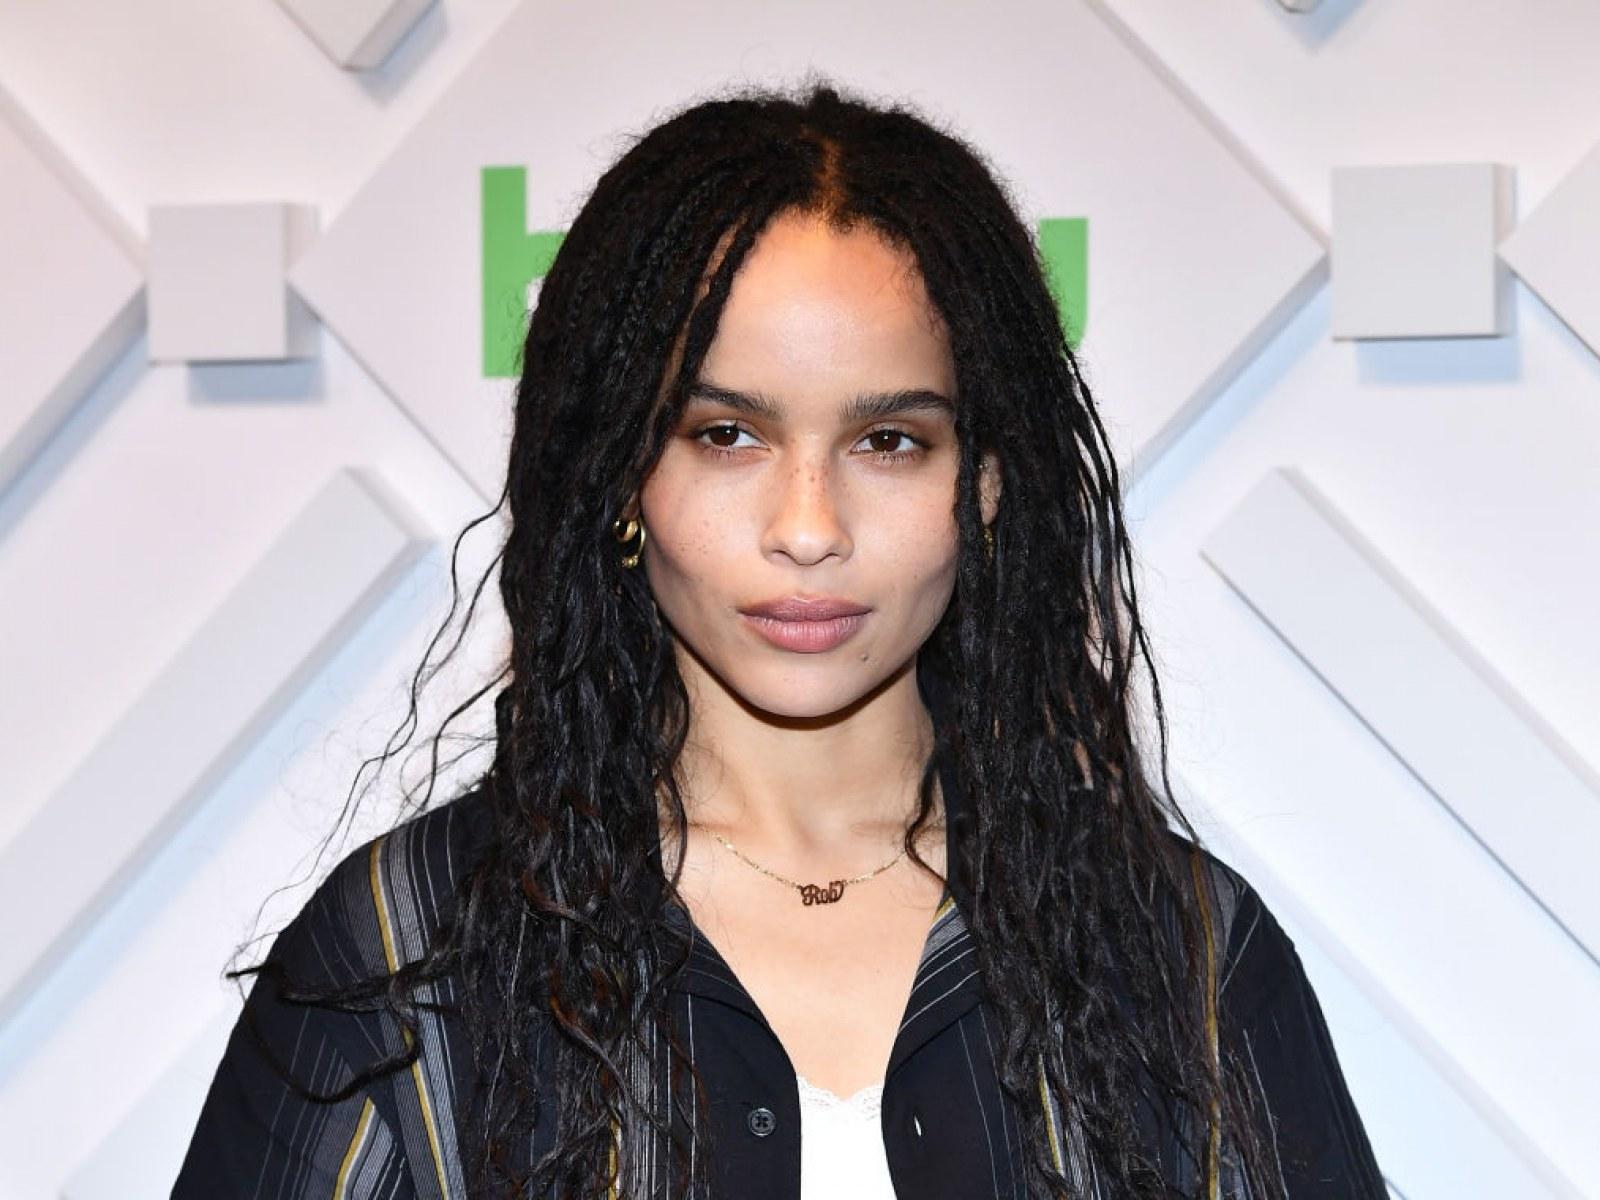 How Will Zoe Kravitz's Catwoman Stack Up Against the Rest?